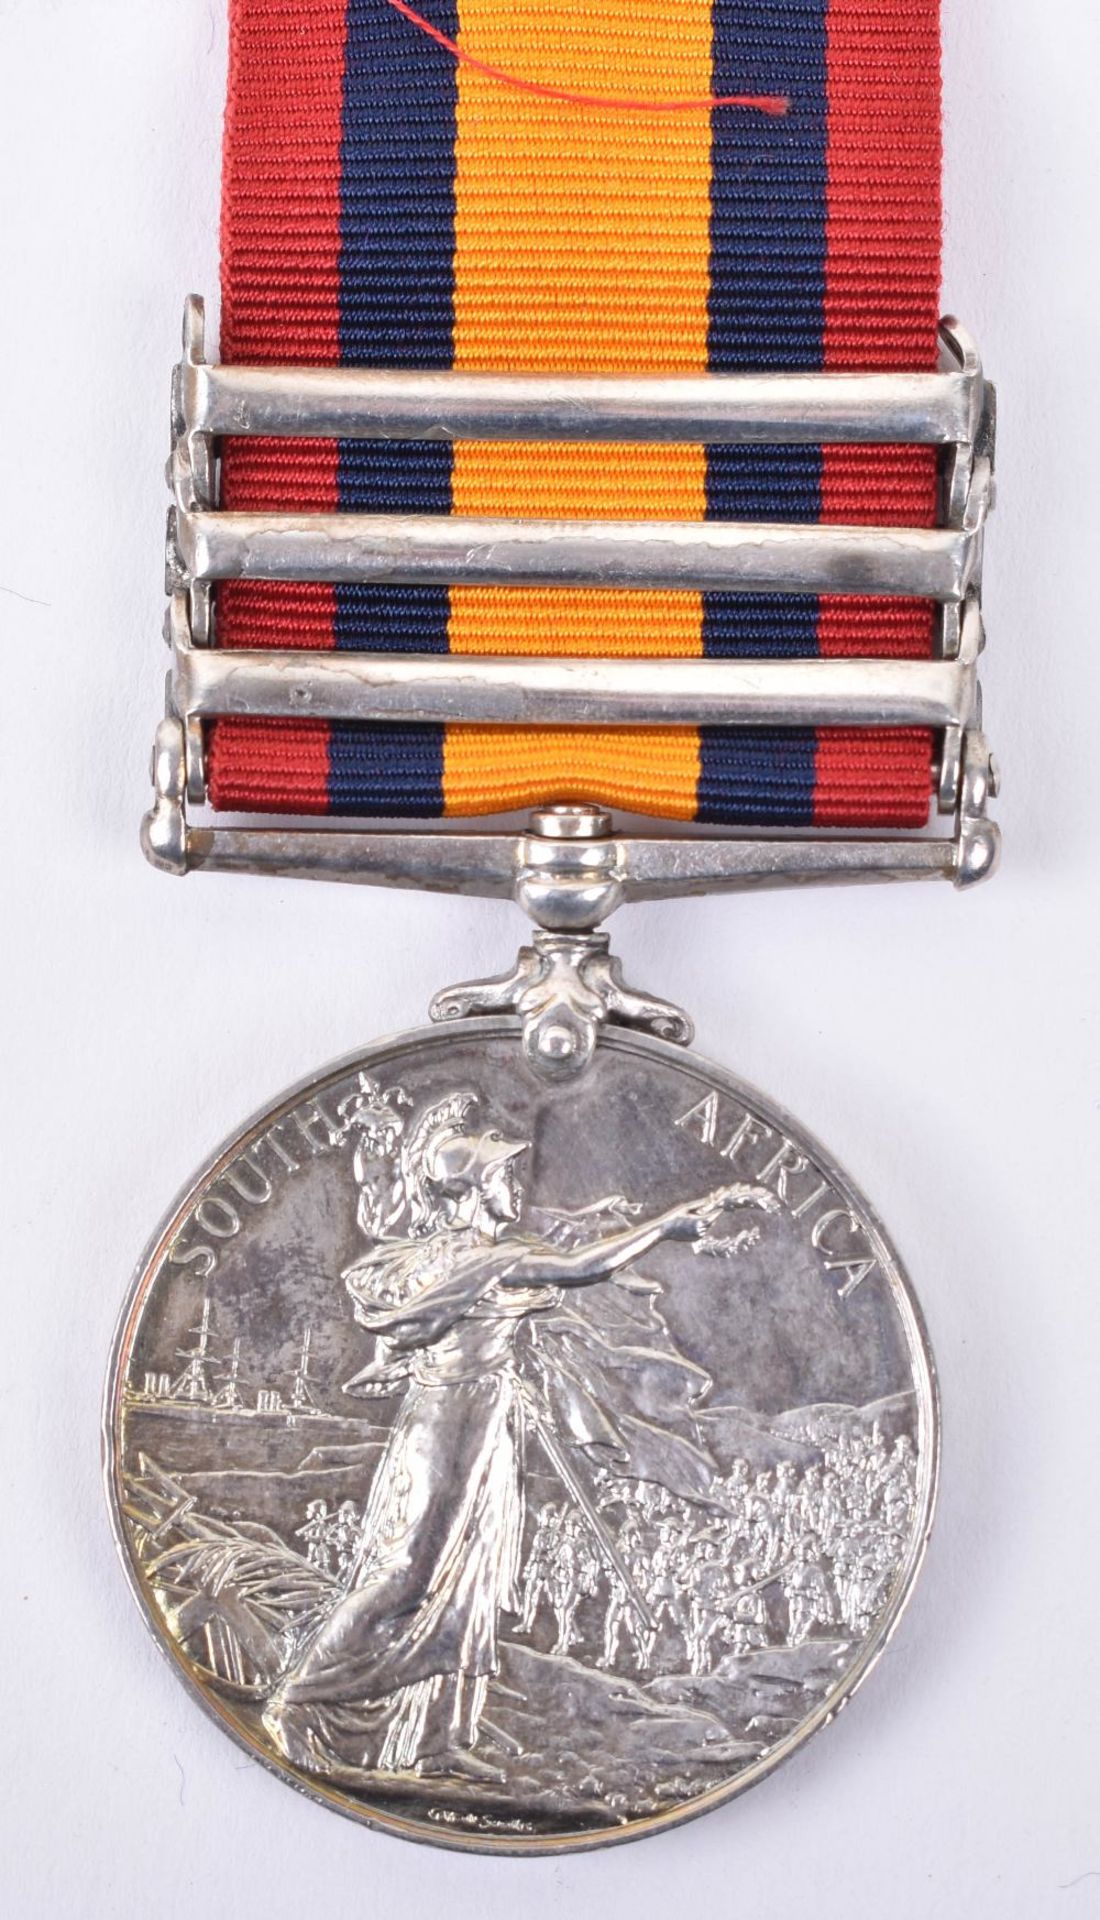 Queens South Africa Medal Cameron Highlanders - Image 3 of 3